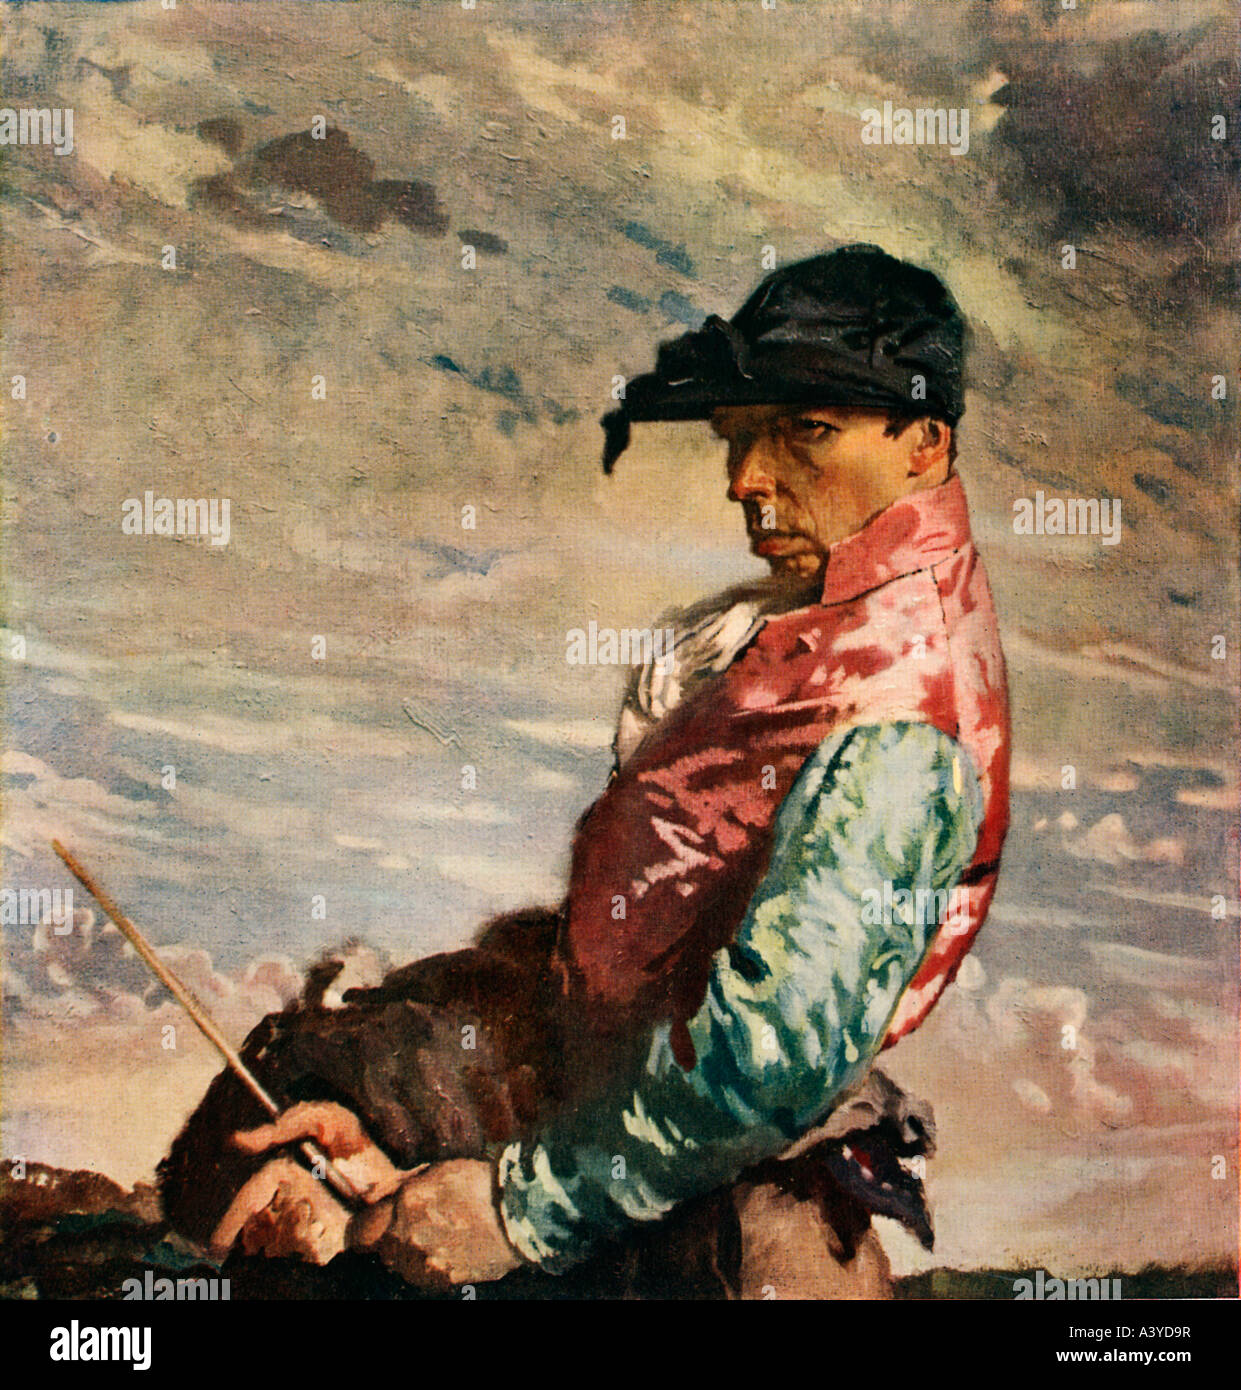 Jockey Edwardian painting by the famous Irish artist William Orpen of a man focused on the winning ride Stock Photo